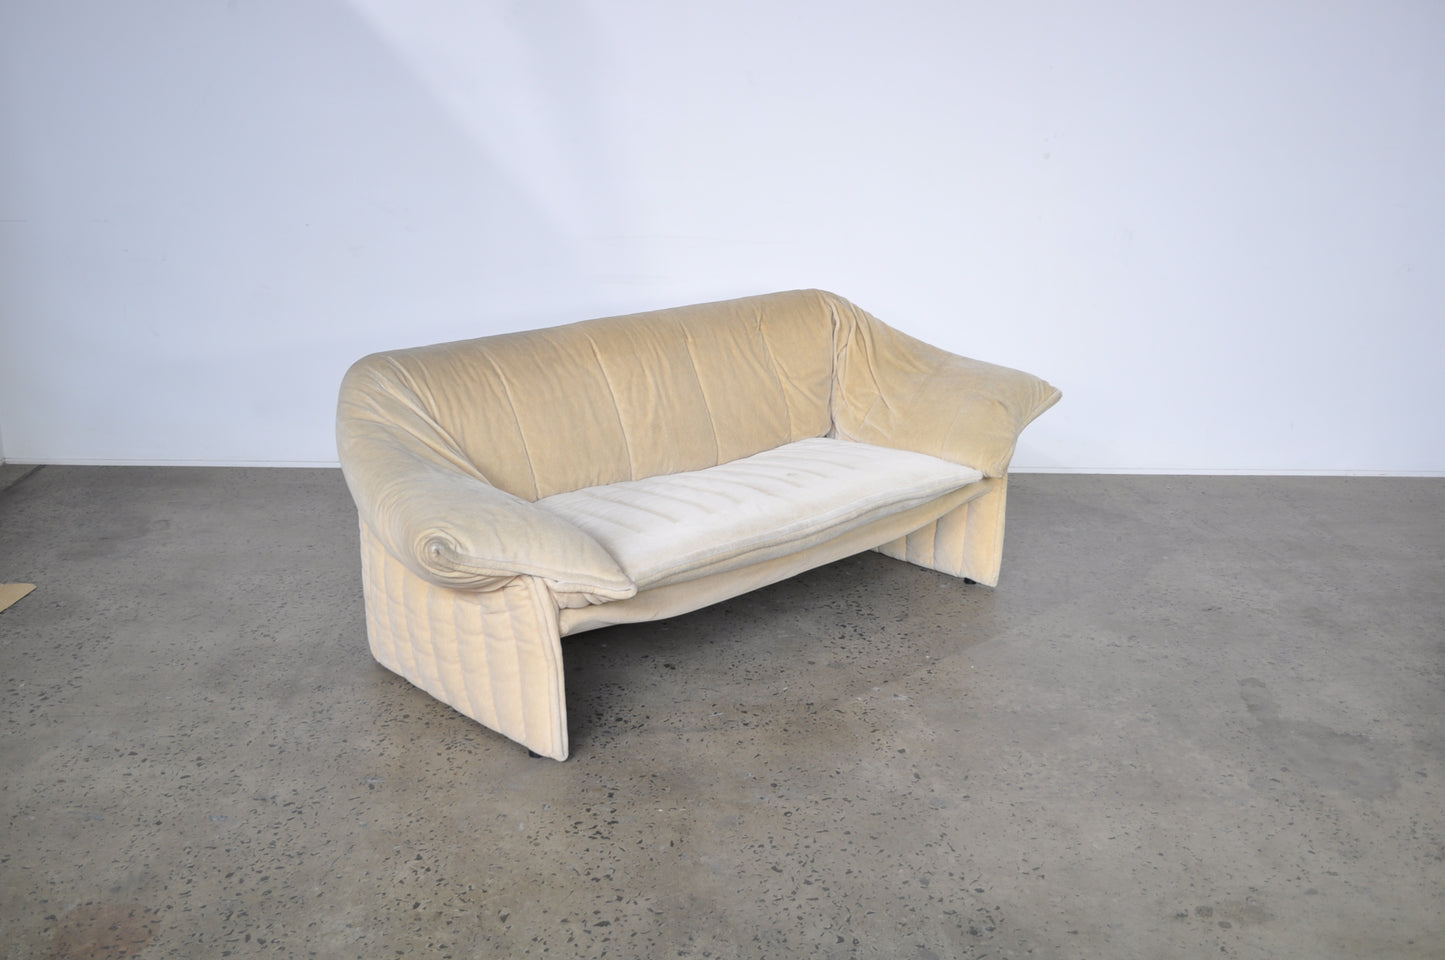 Mario Bellini "le Stelle" Sofa and  lounge chair set. Restoration project.